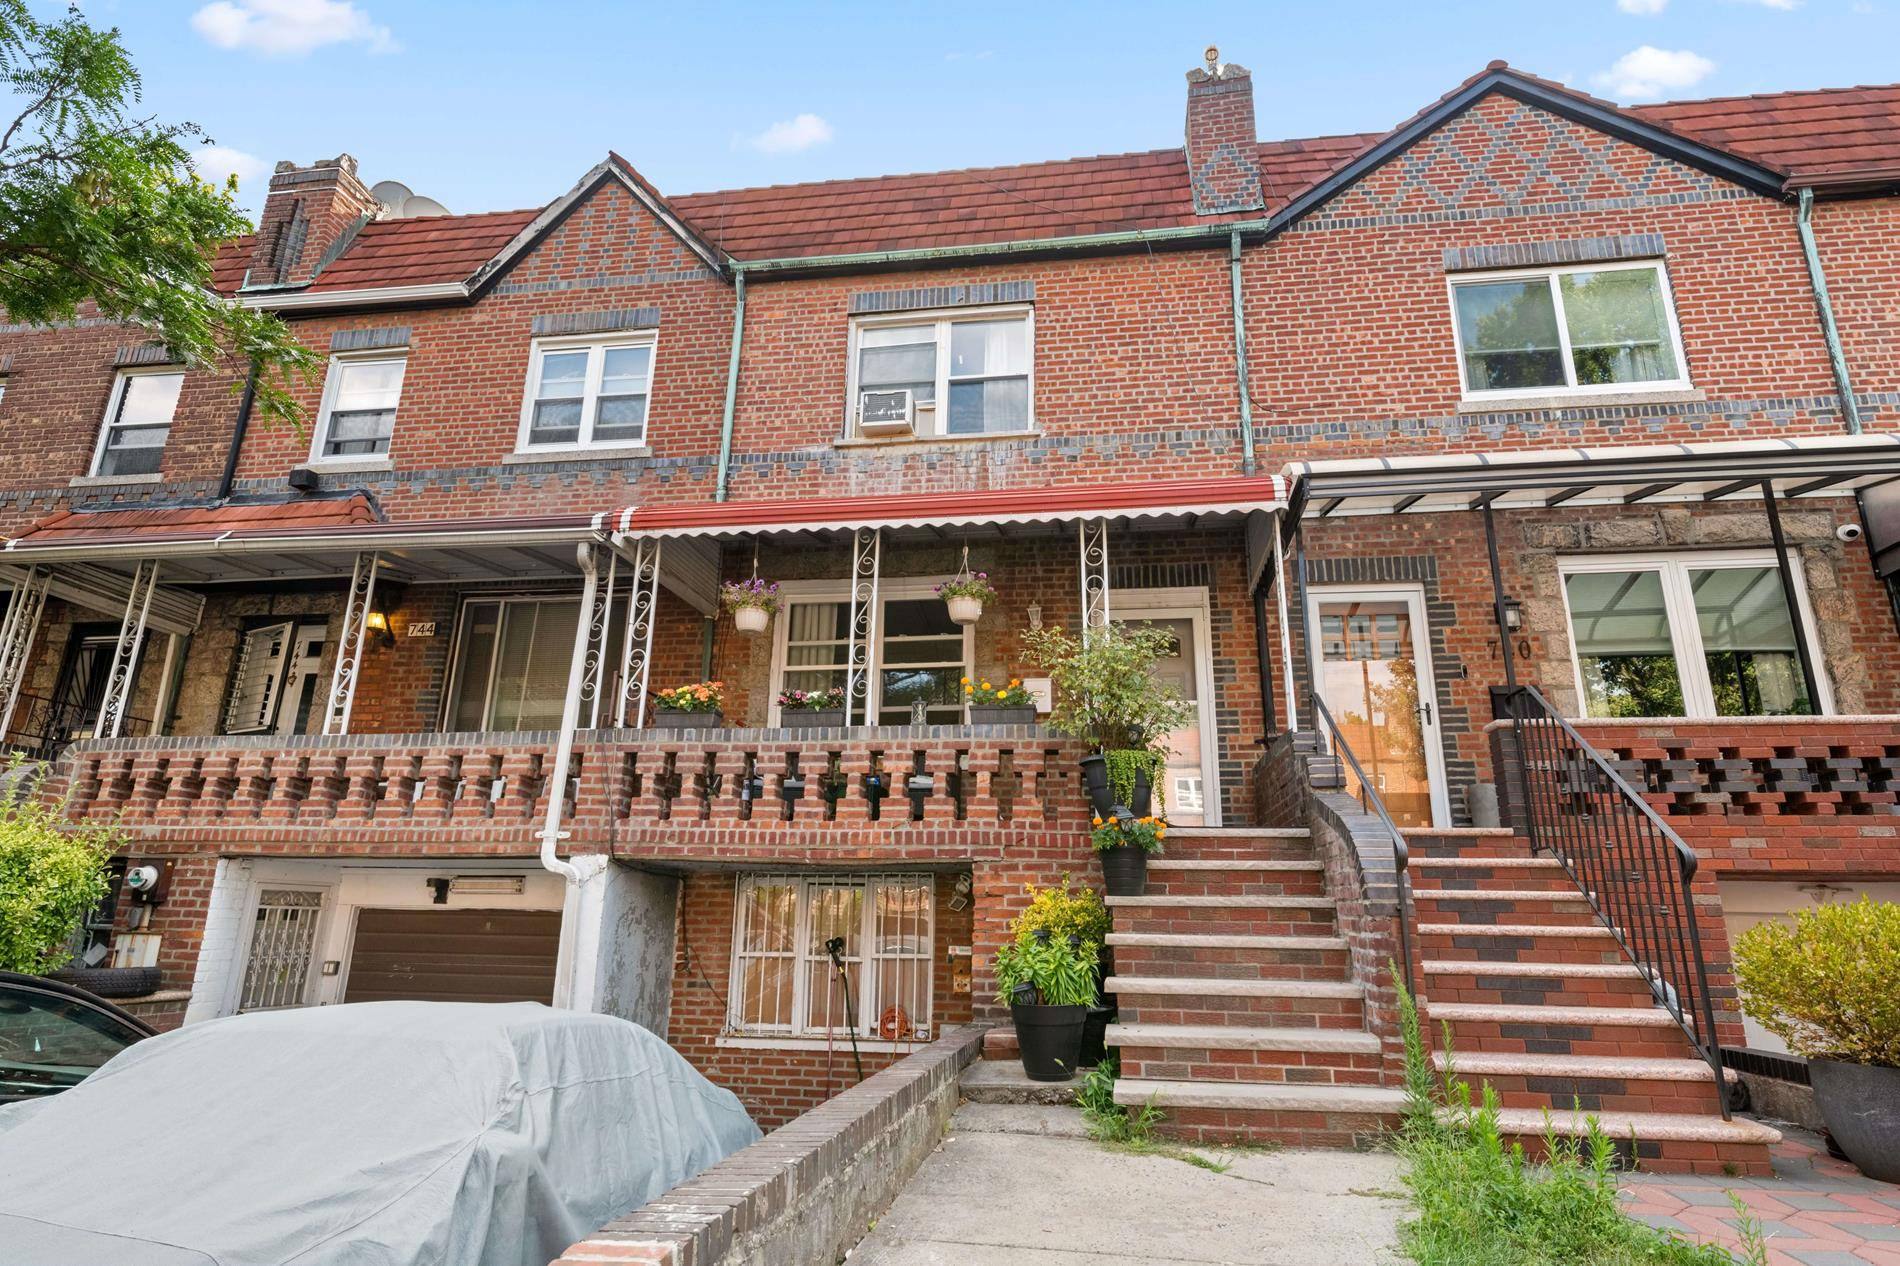 Welcome to this beautiful brick one family house perfectly situated on a picturesque tree lined block in the most desirable East Flatbush neighborhood.